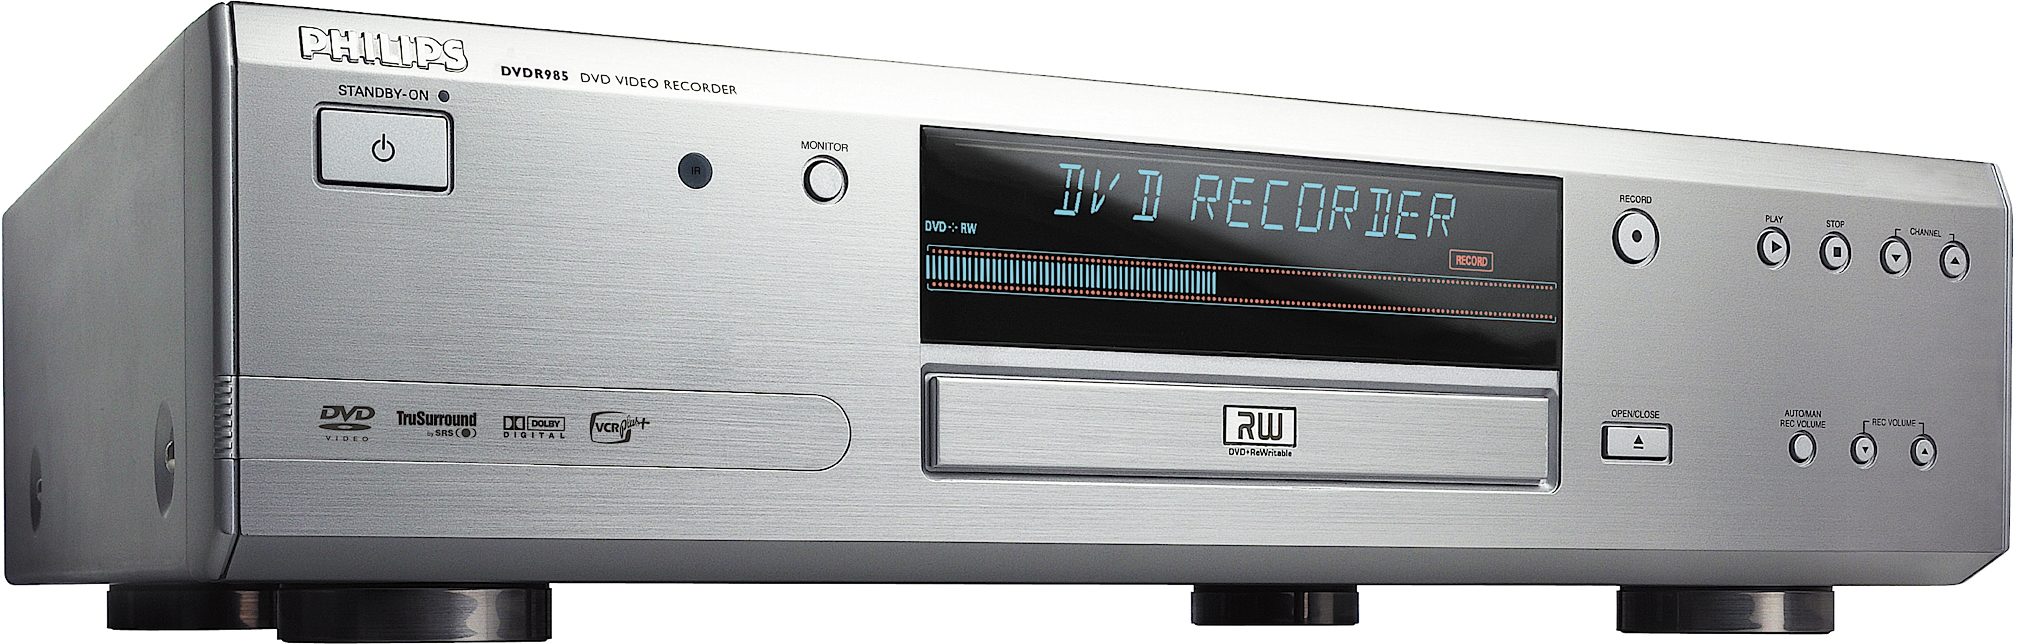 nep Dhr Retentie Philips DVDR985 DVD-RW Recorder and Player with Remote | zZounds